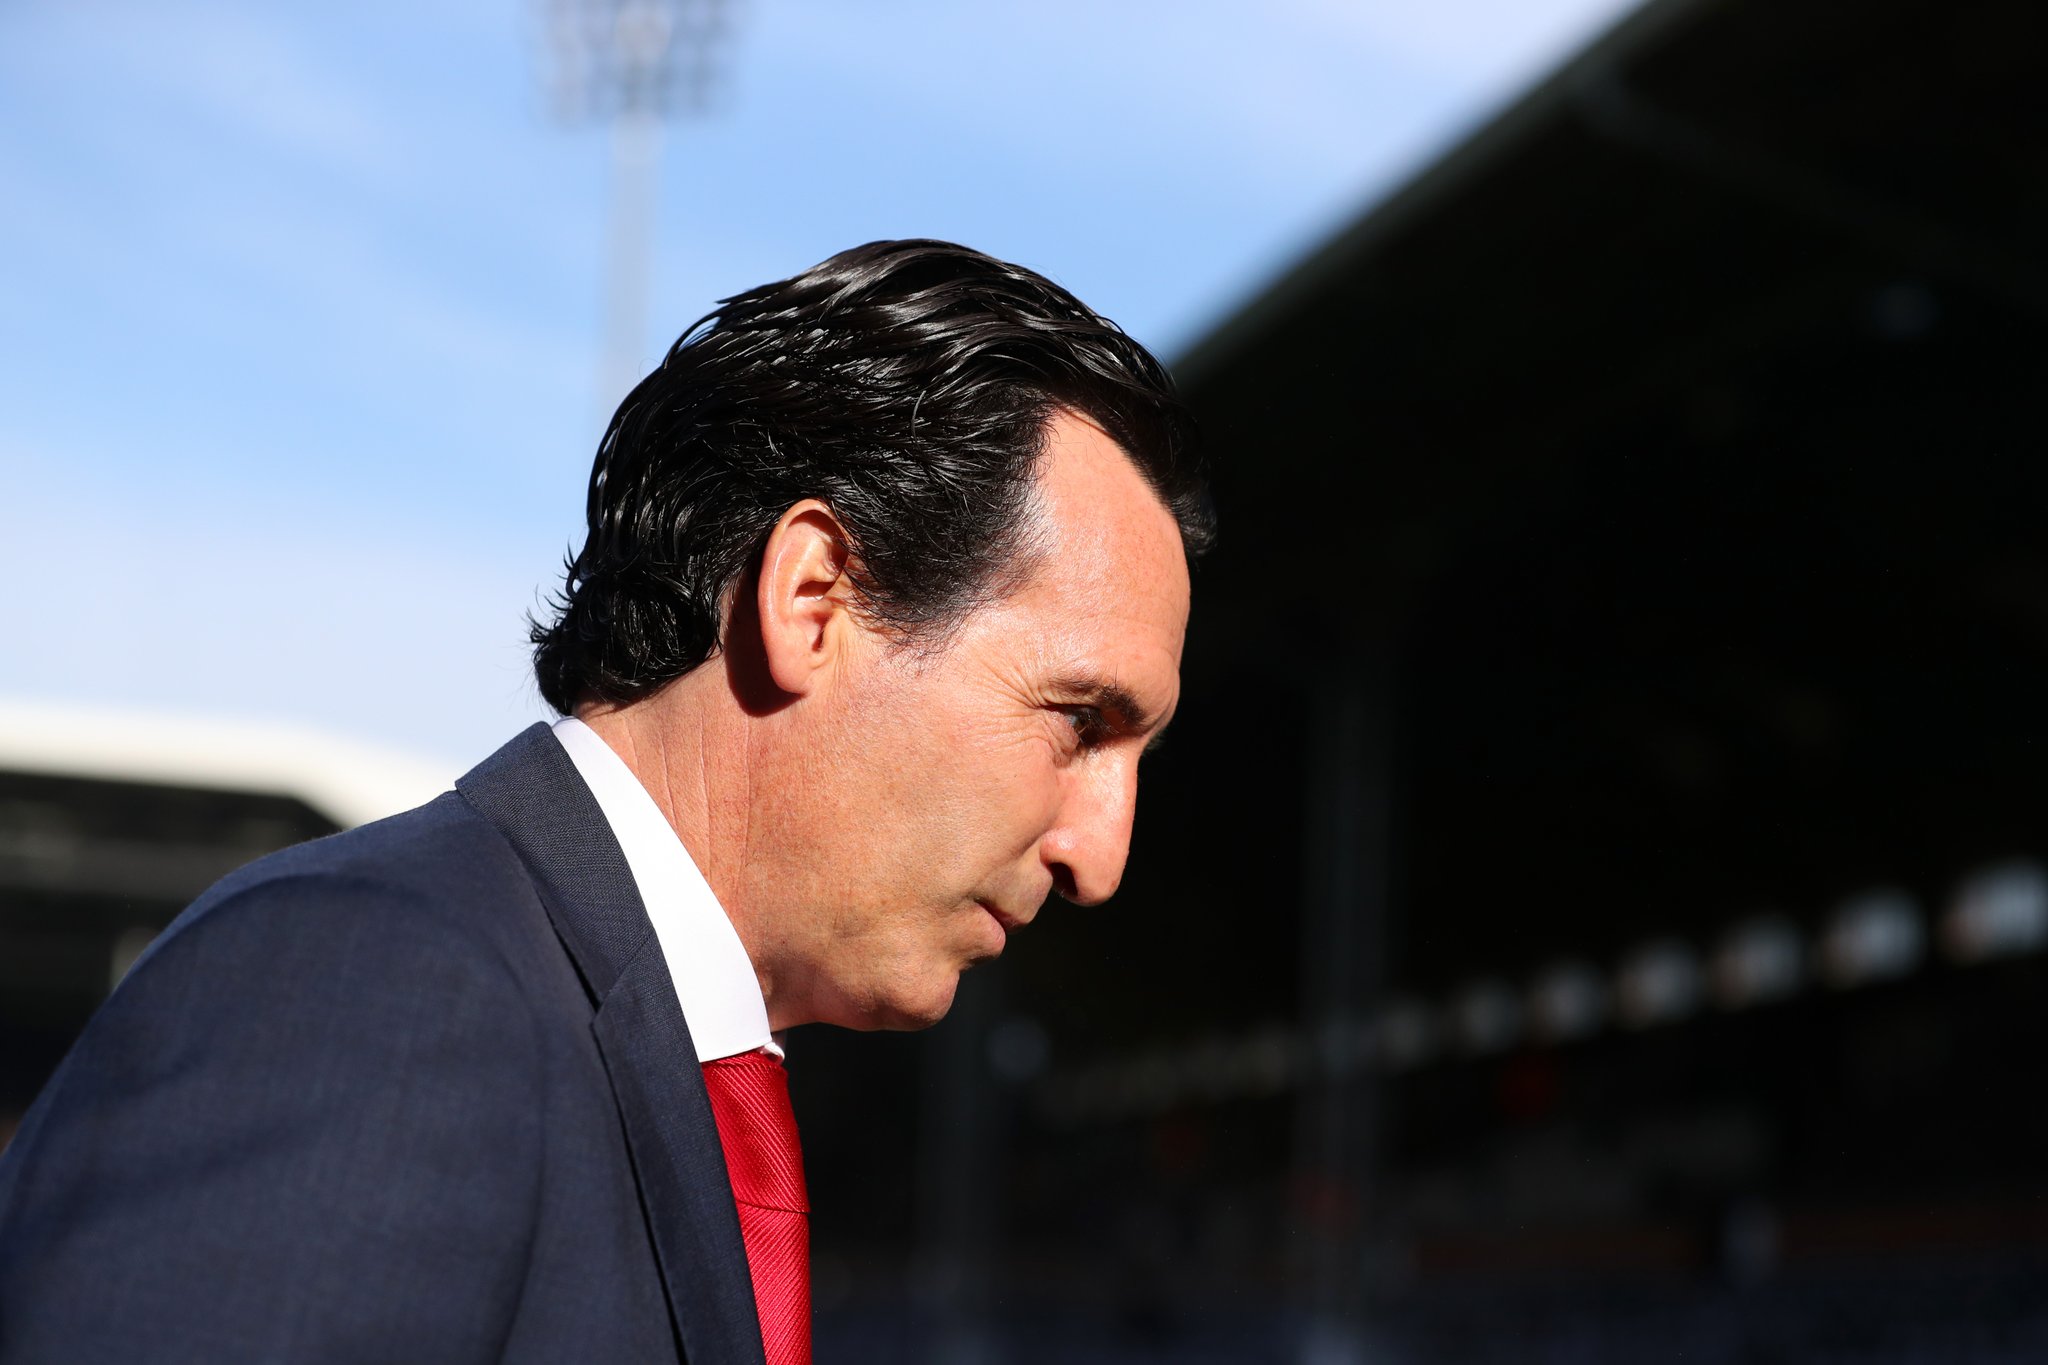 Emery hits out at Arsenal players: ‘Some did not have a good attitude’